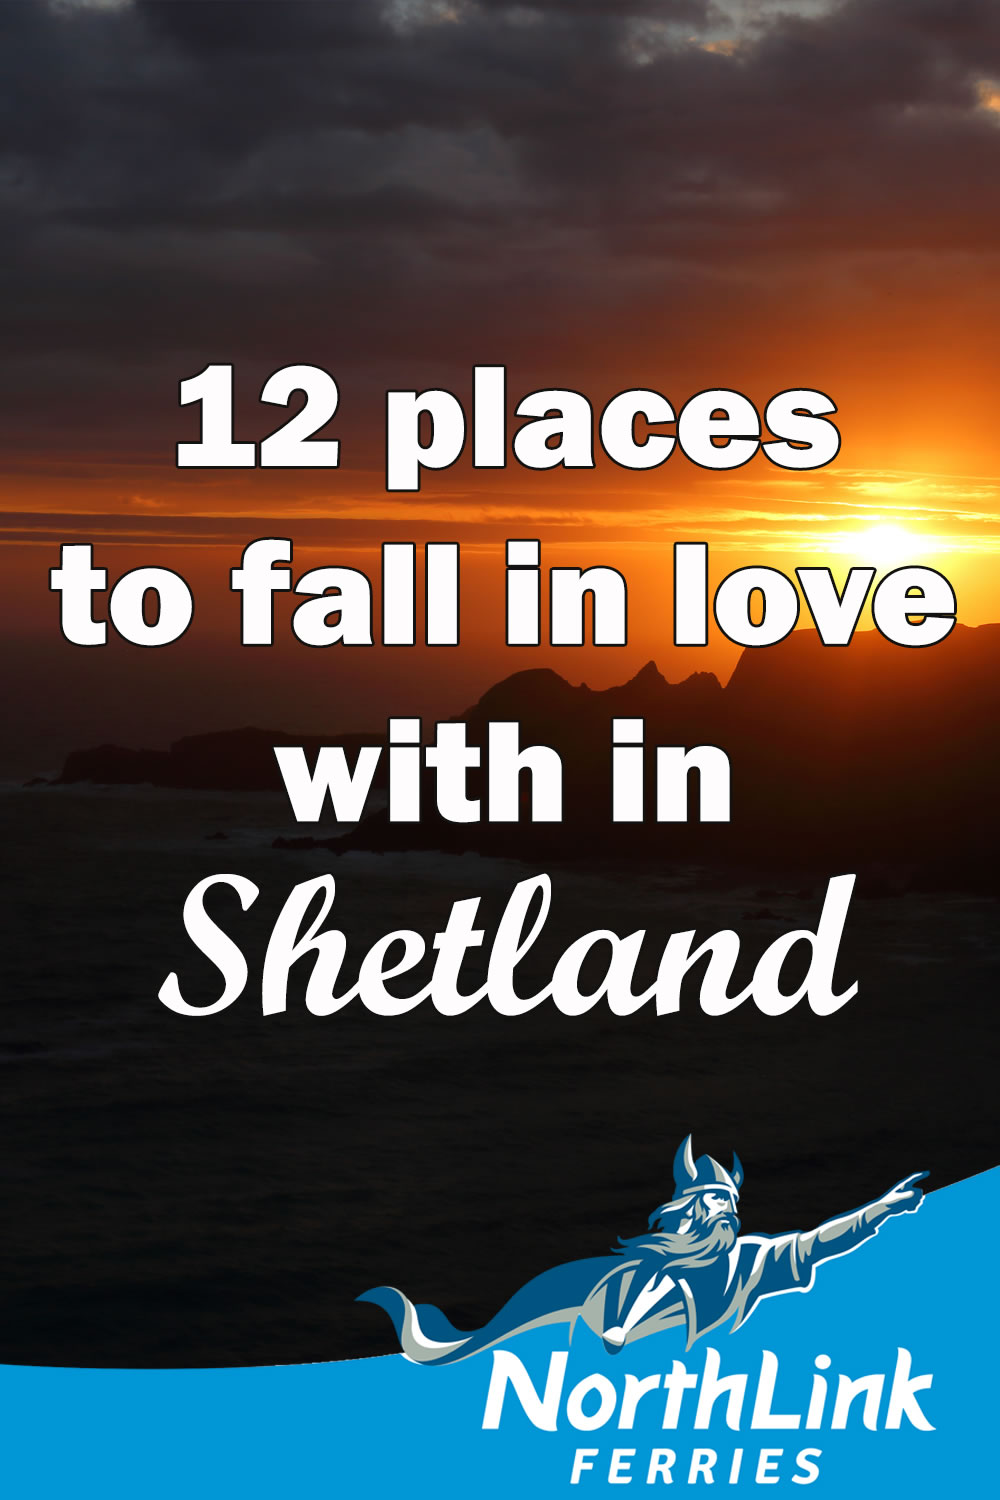 12 places to fall in love with in Shetland